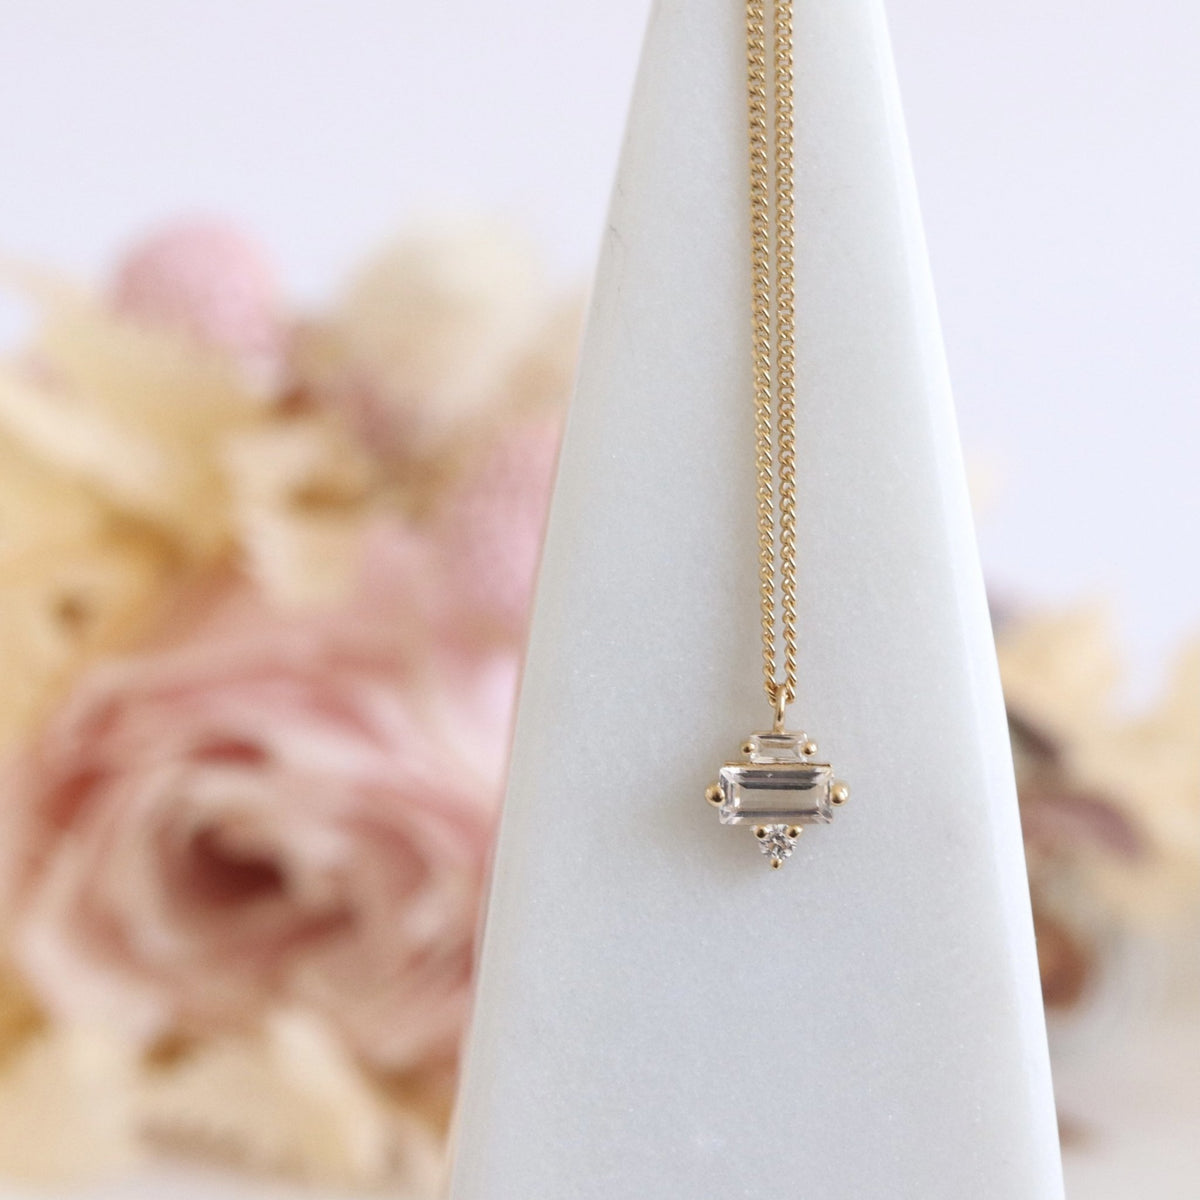 Tiny Loyal Prism Necklace - White Topaz, Cubic Zirconia &amp; Silver - SO PRETTY CARA COTTER